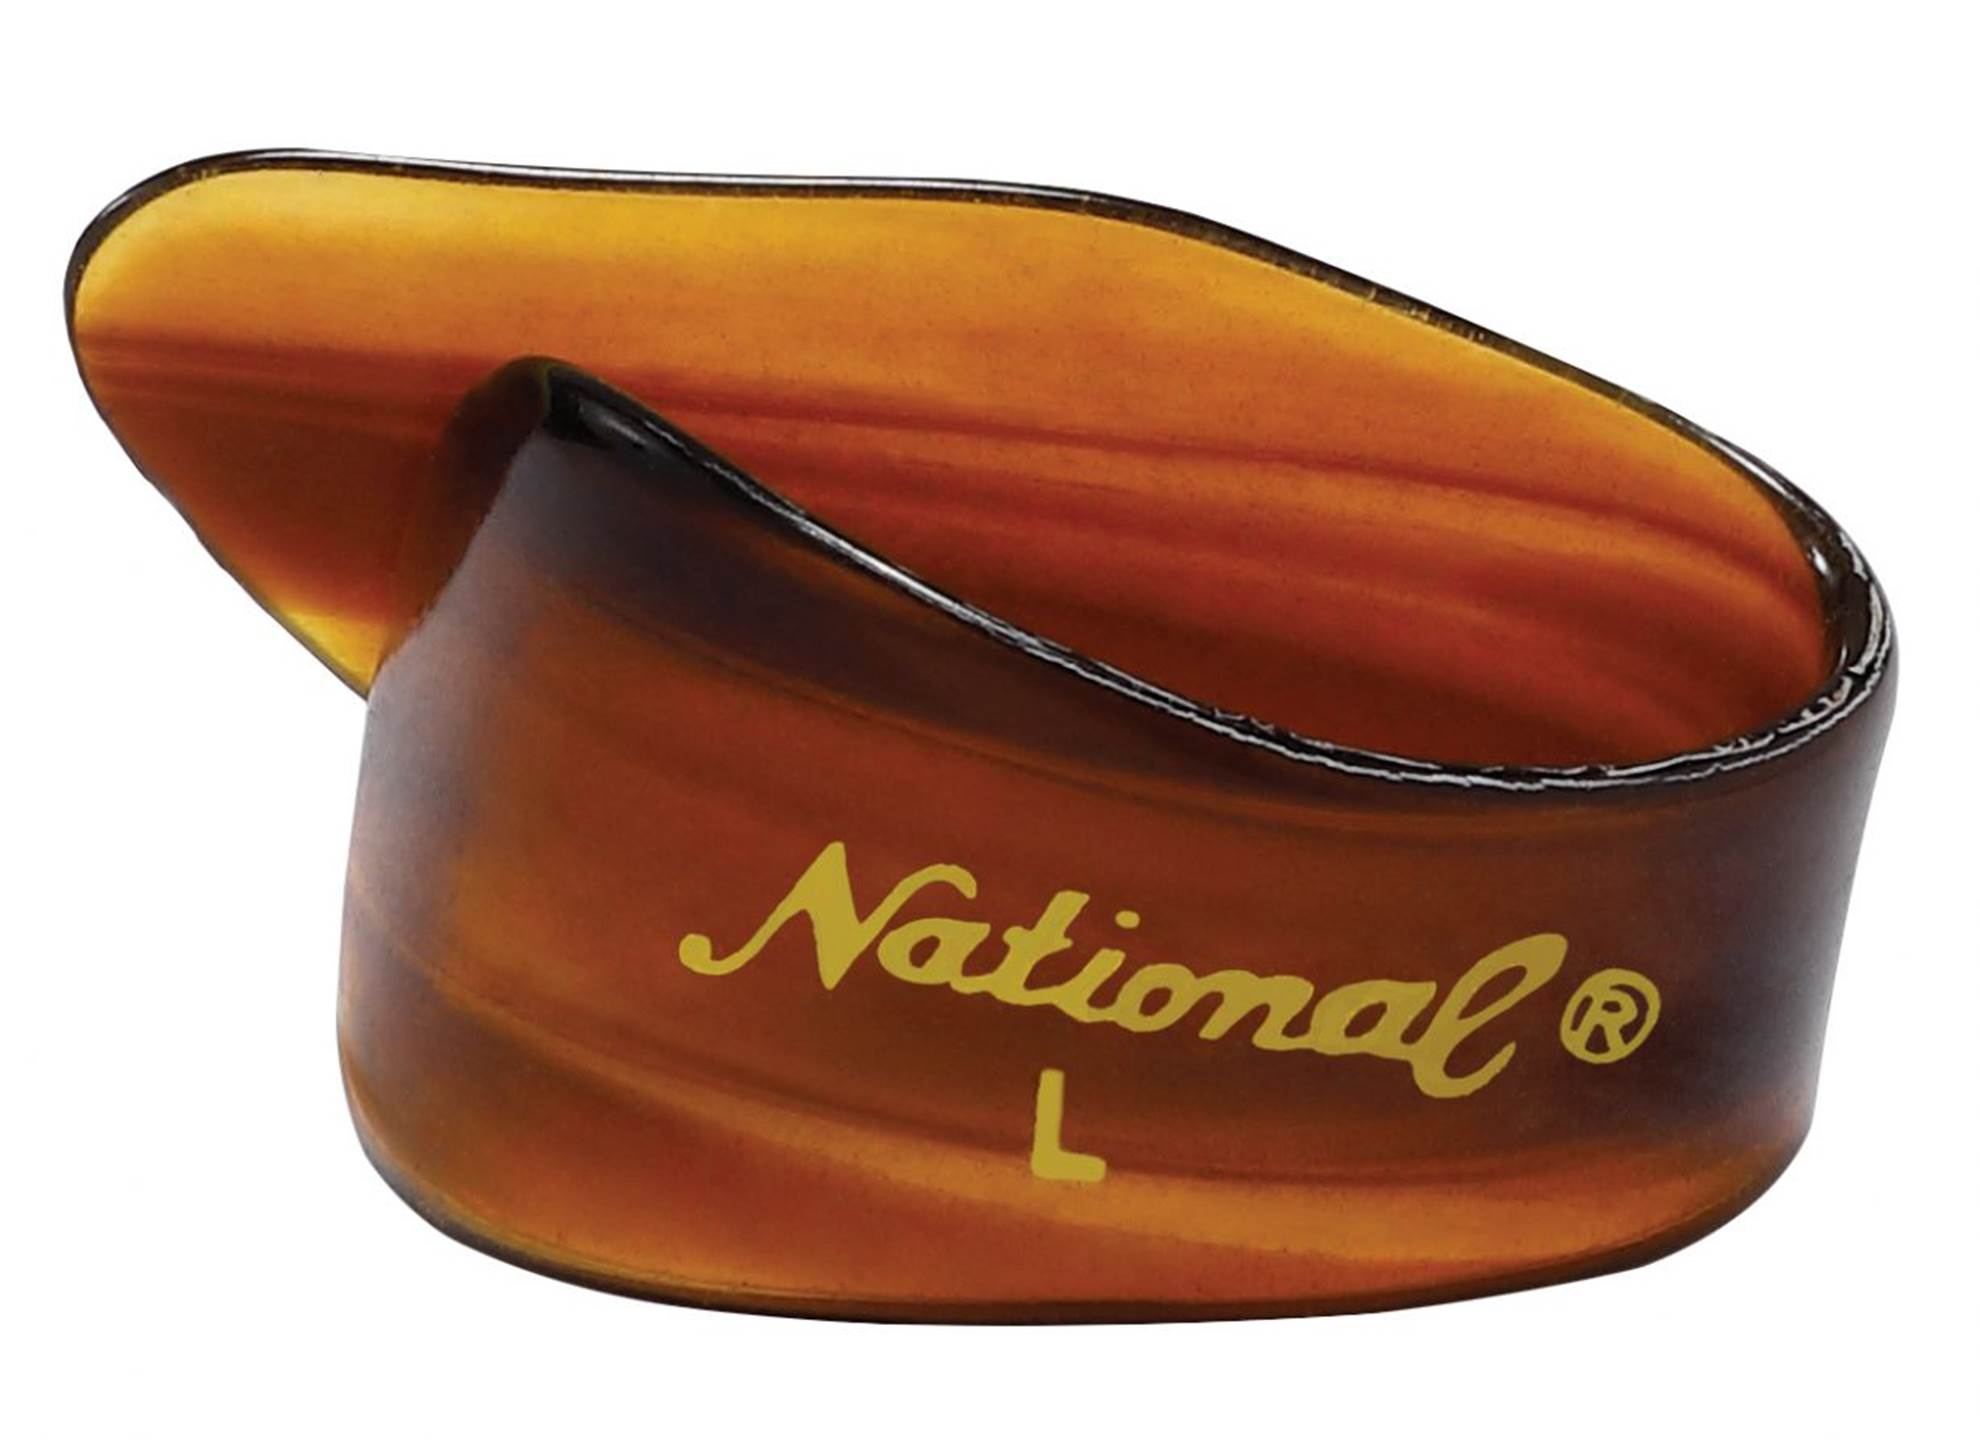 NP8T PW National Thumb pick Large Celluloid Shell